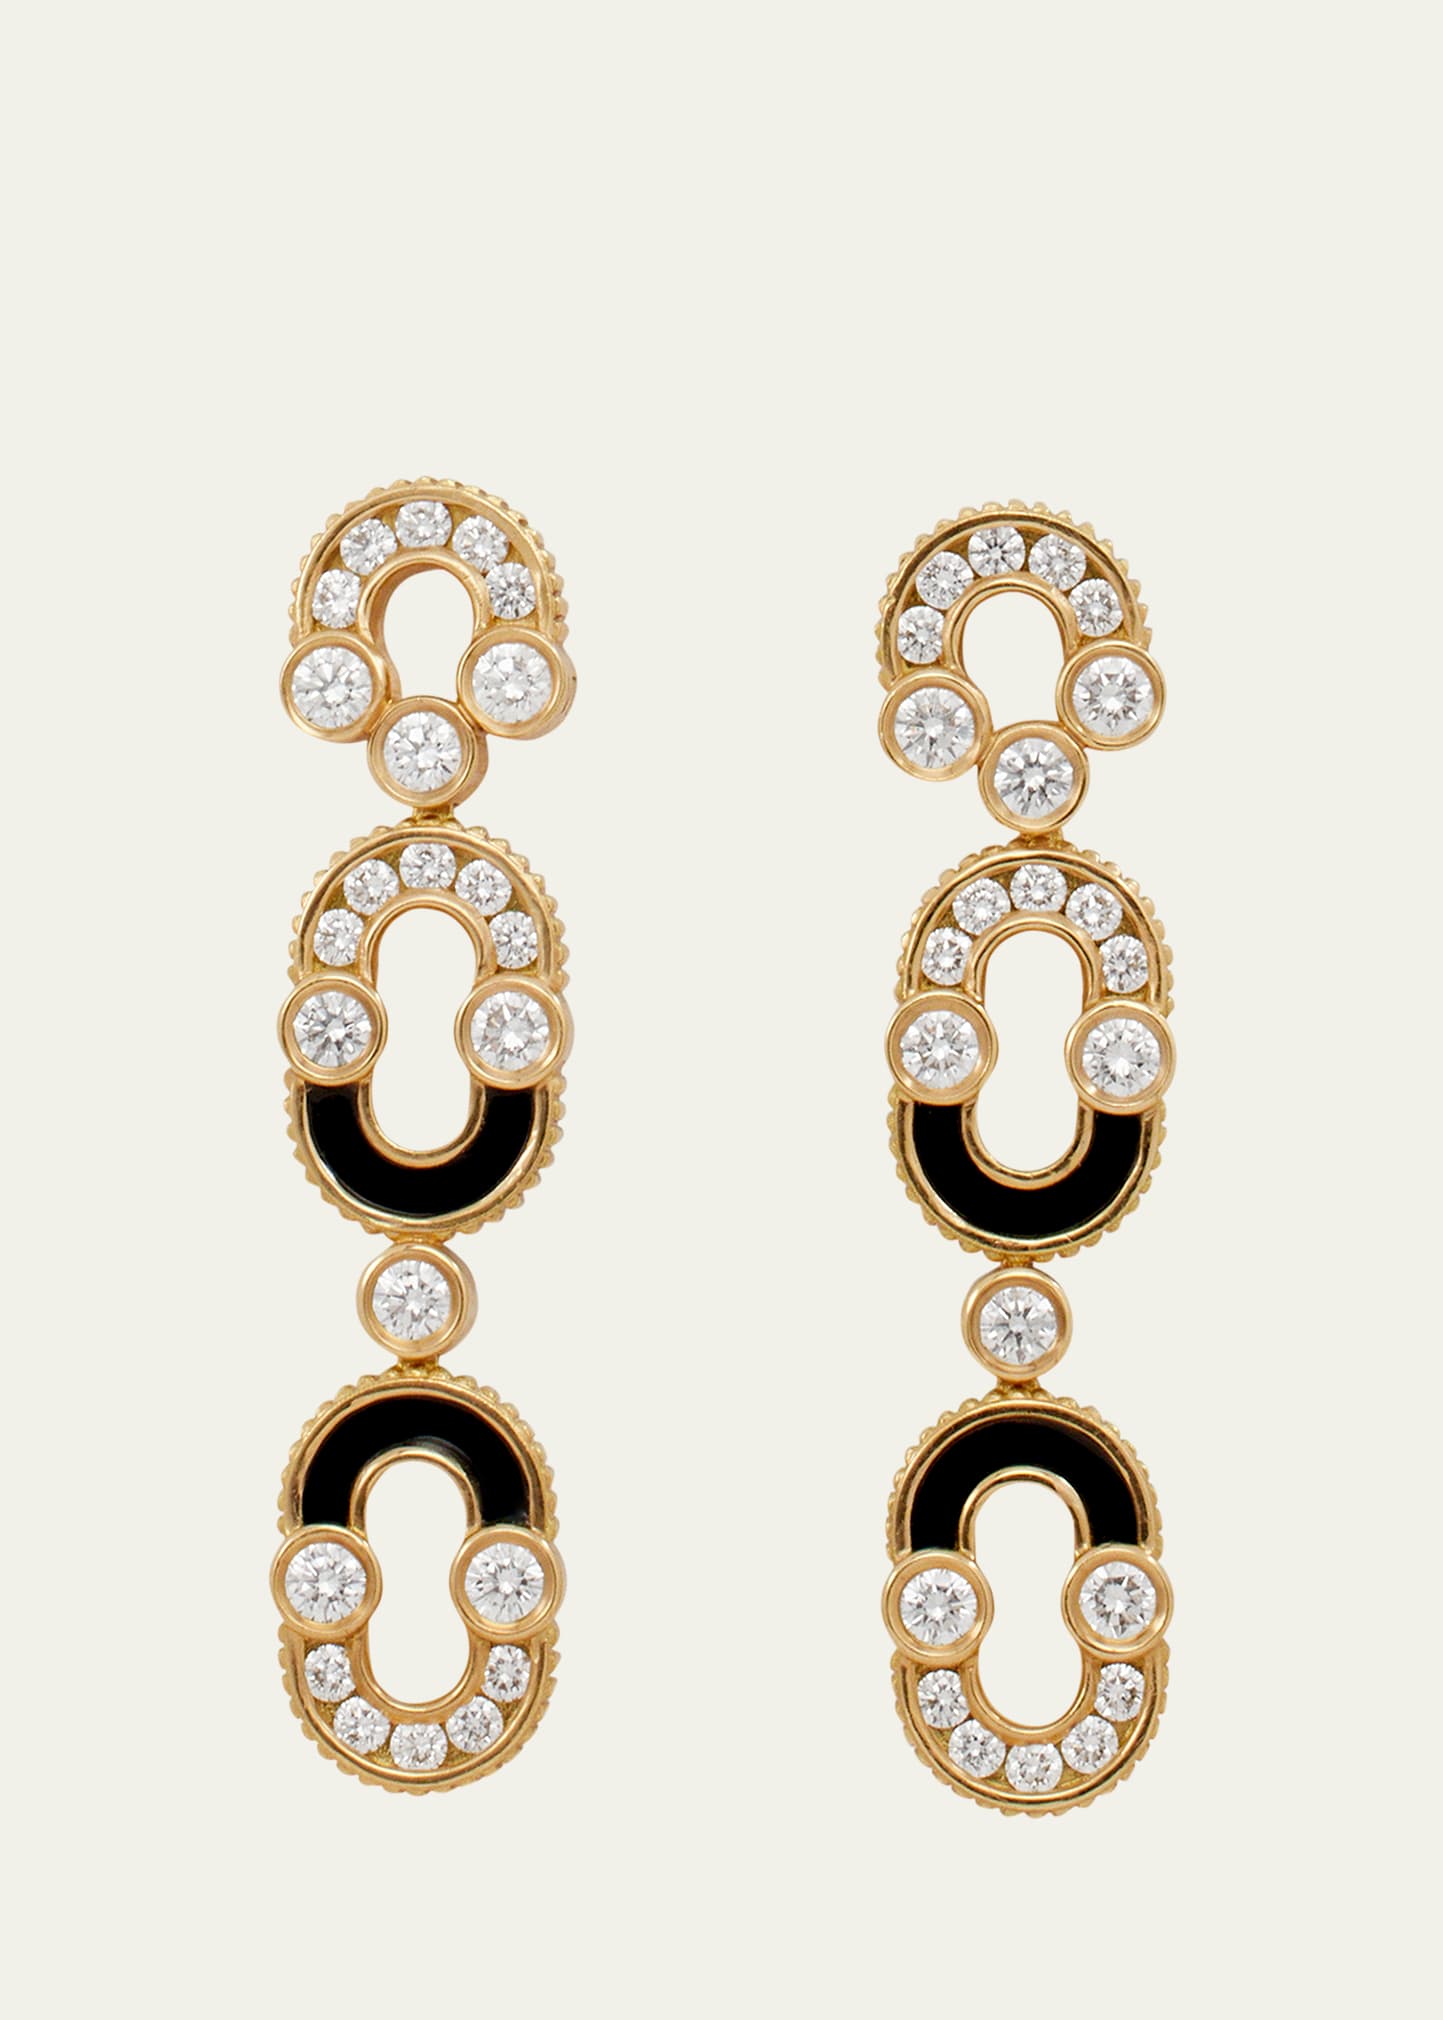 Magnetic Duo Earrings in Onyx, 18K Yellow Gold and Diamonds